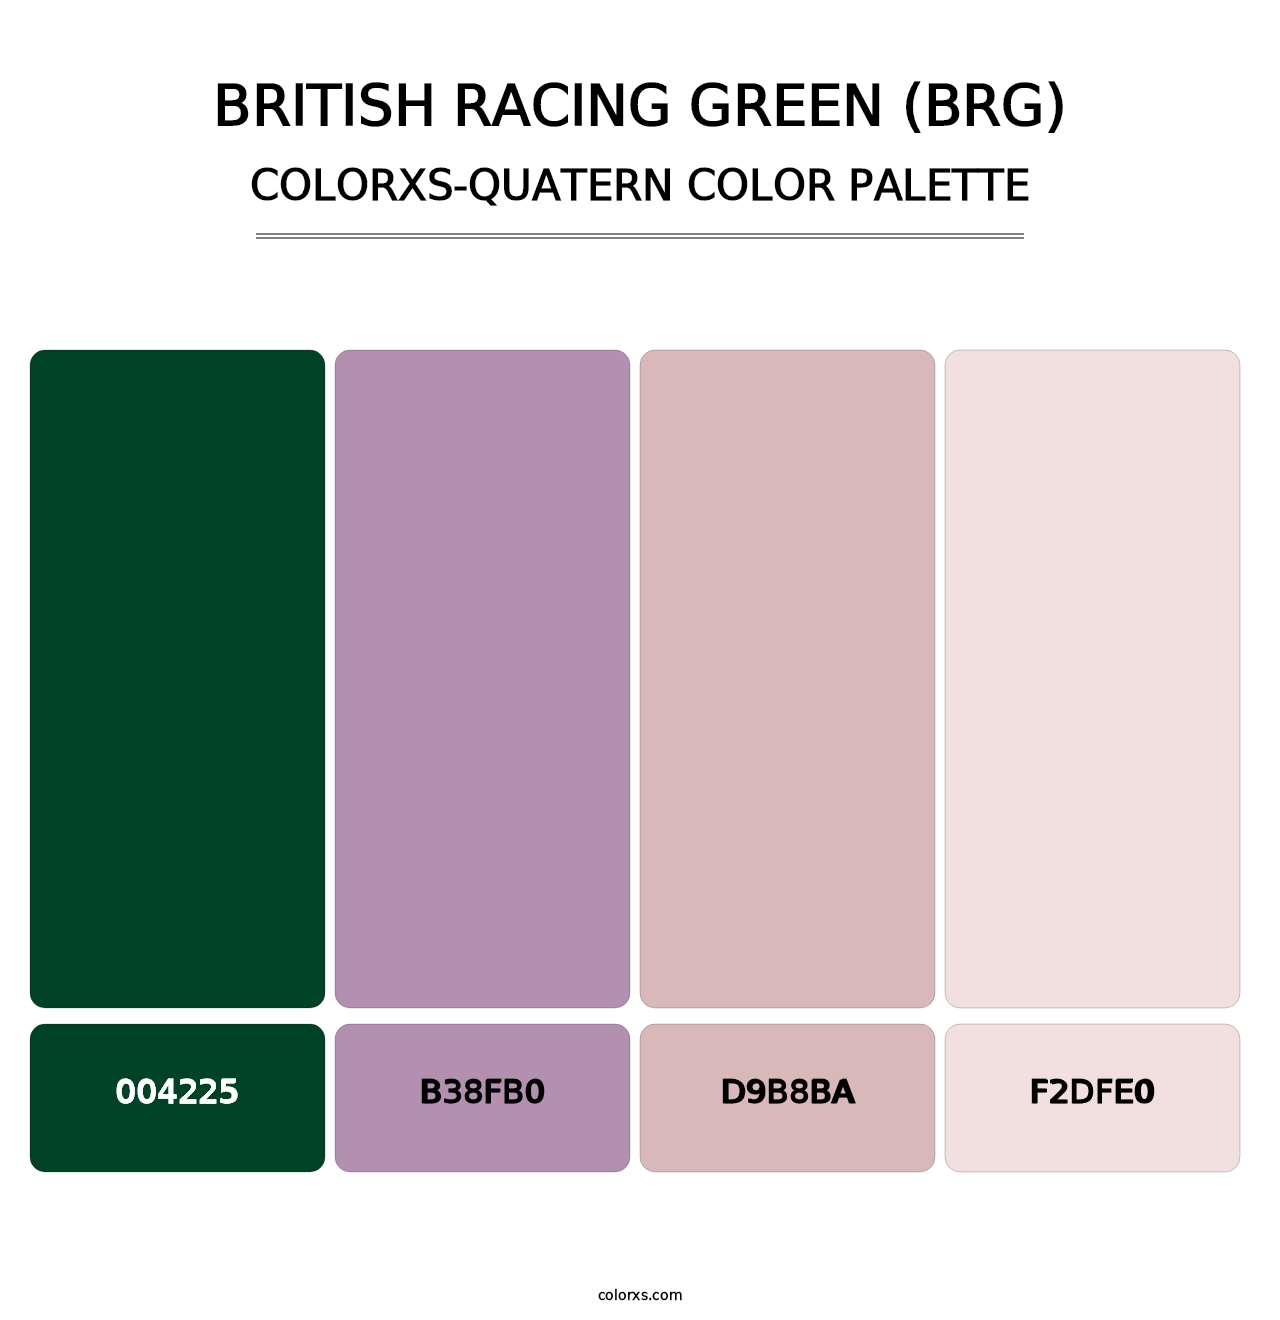 British Racing Green (BRG) - Colorxs Quatern Palette